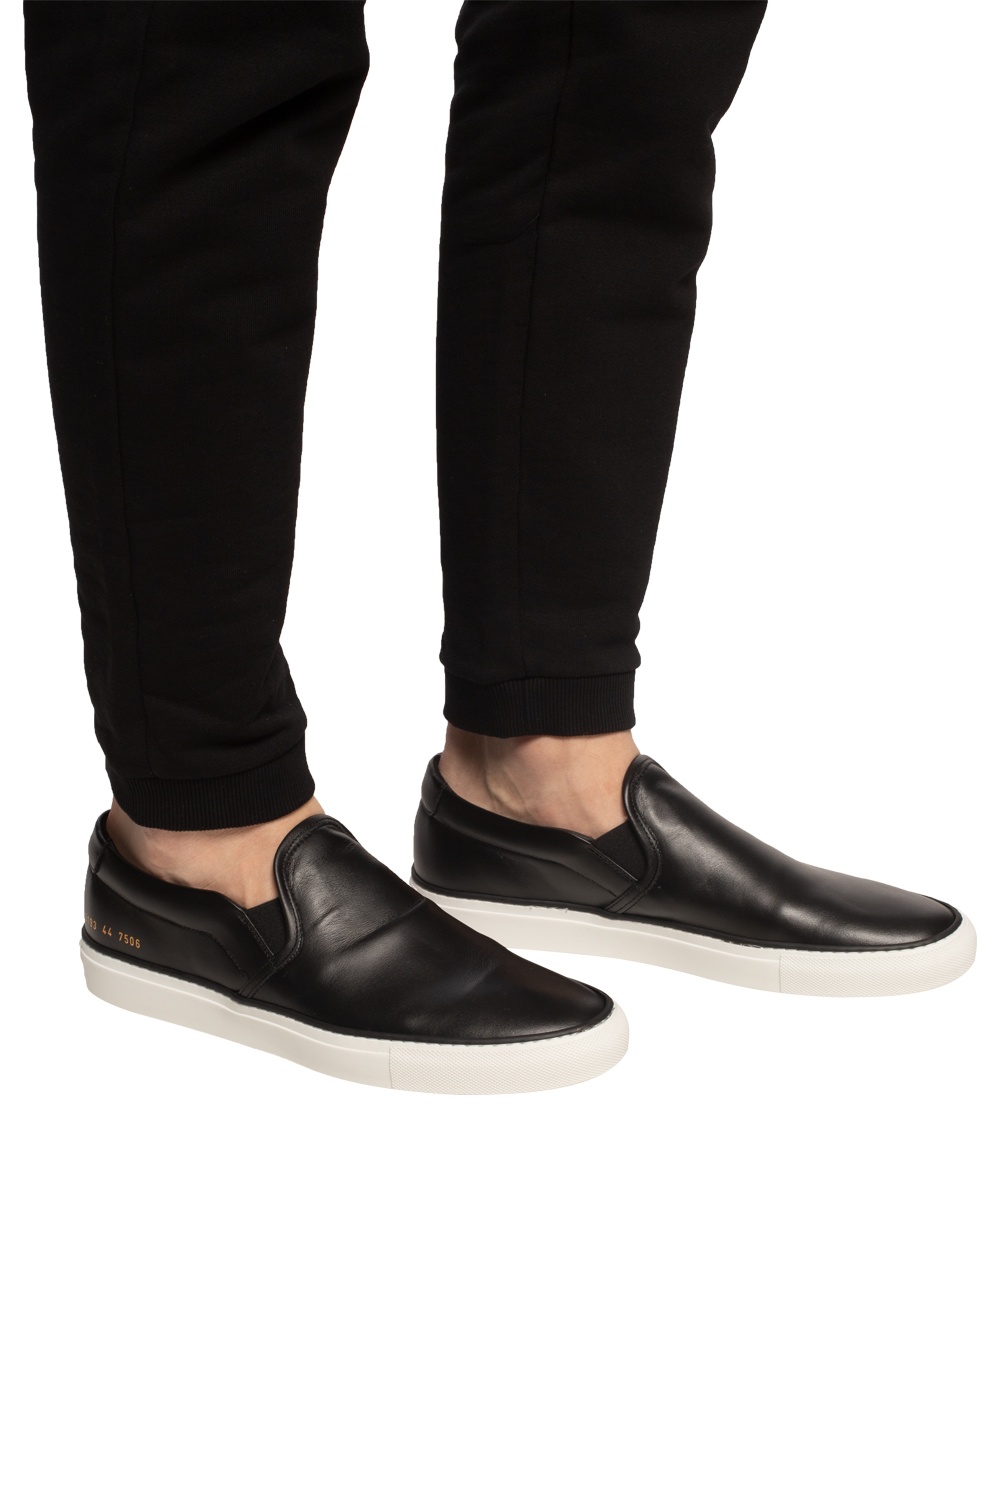 common projects slip on